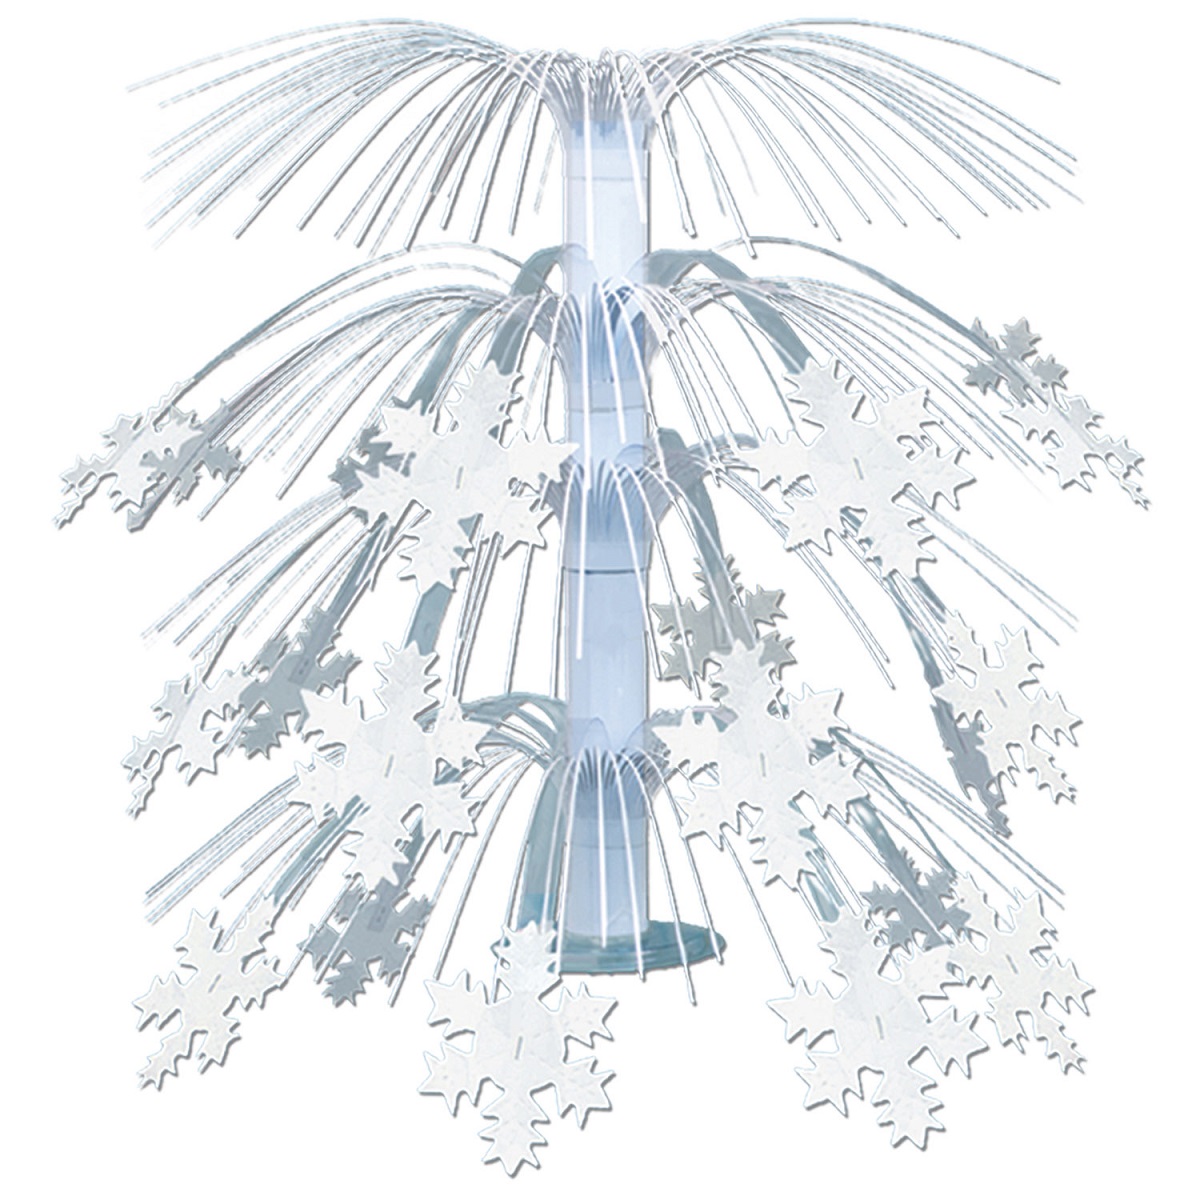 Beistle Pack of 6 Christmas Themed Snowflake Cascade Decorative Party Centerpieces 18" - image 1 of 1